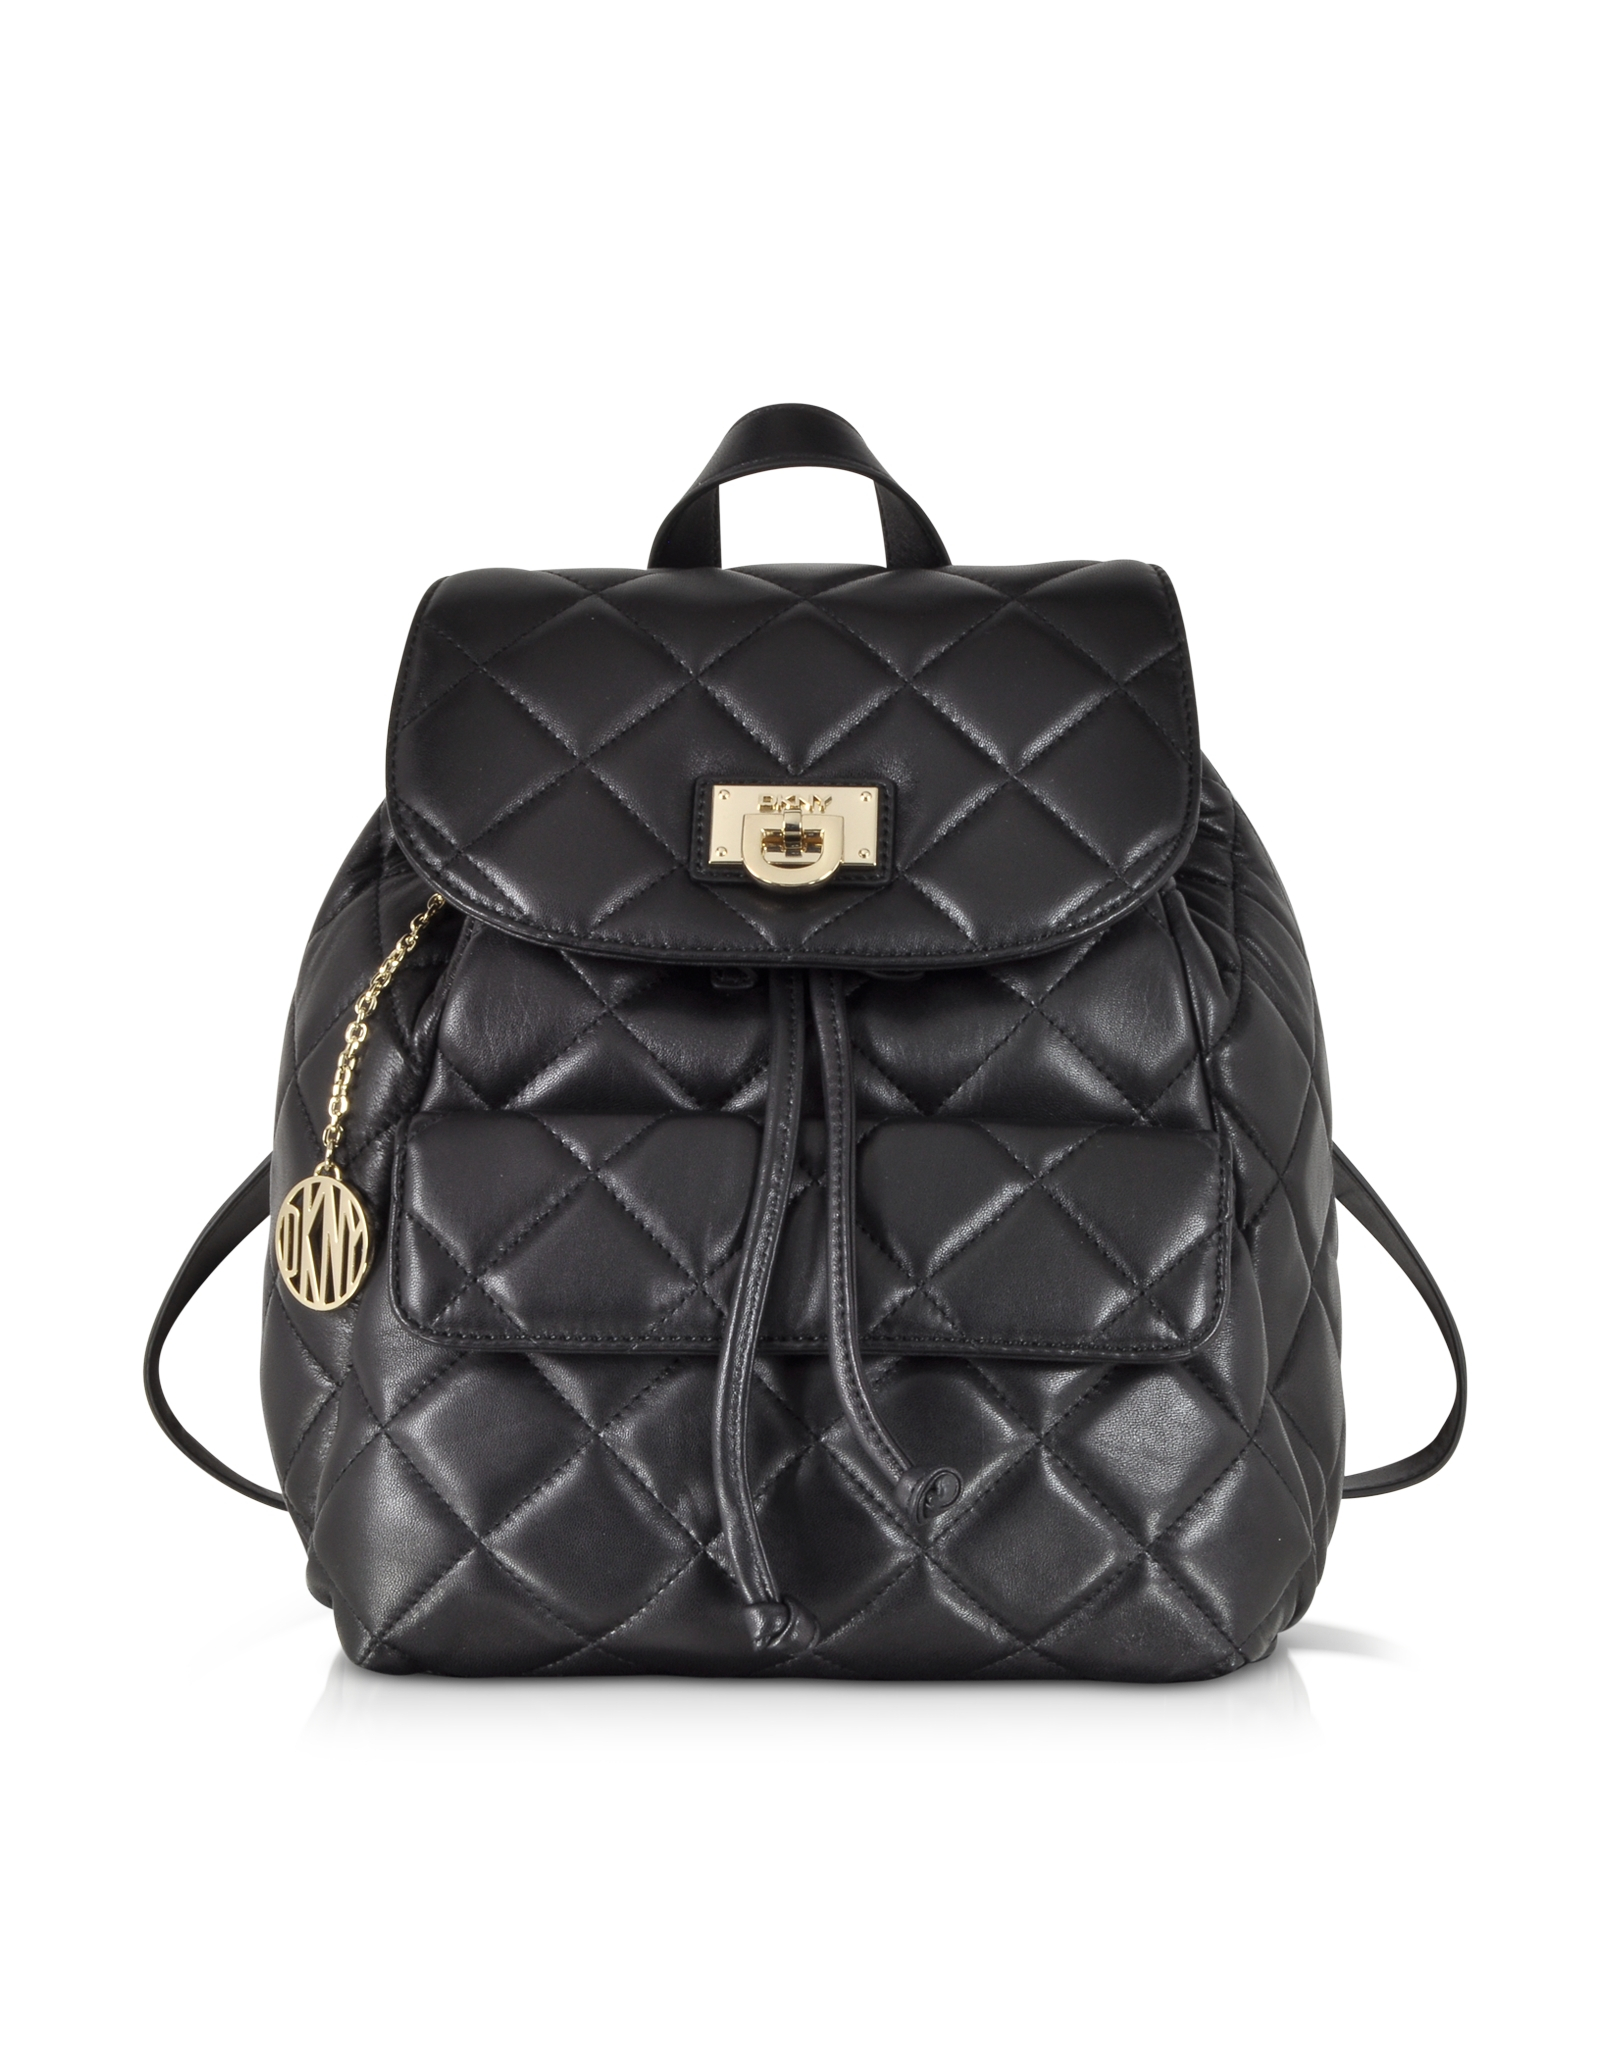 DKNY Gansevoort Black Quilted Nappa Leather Backpack - Lyst